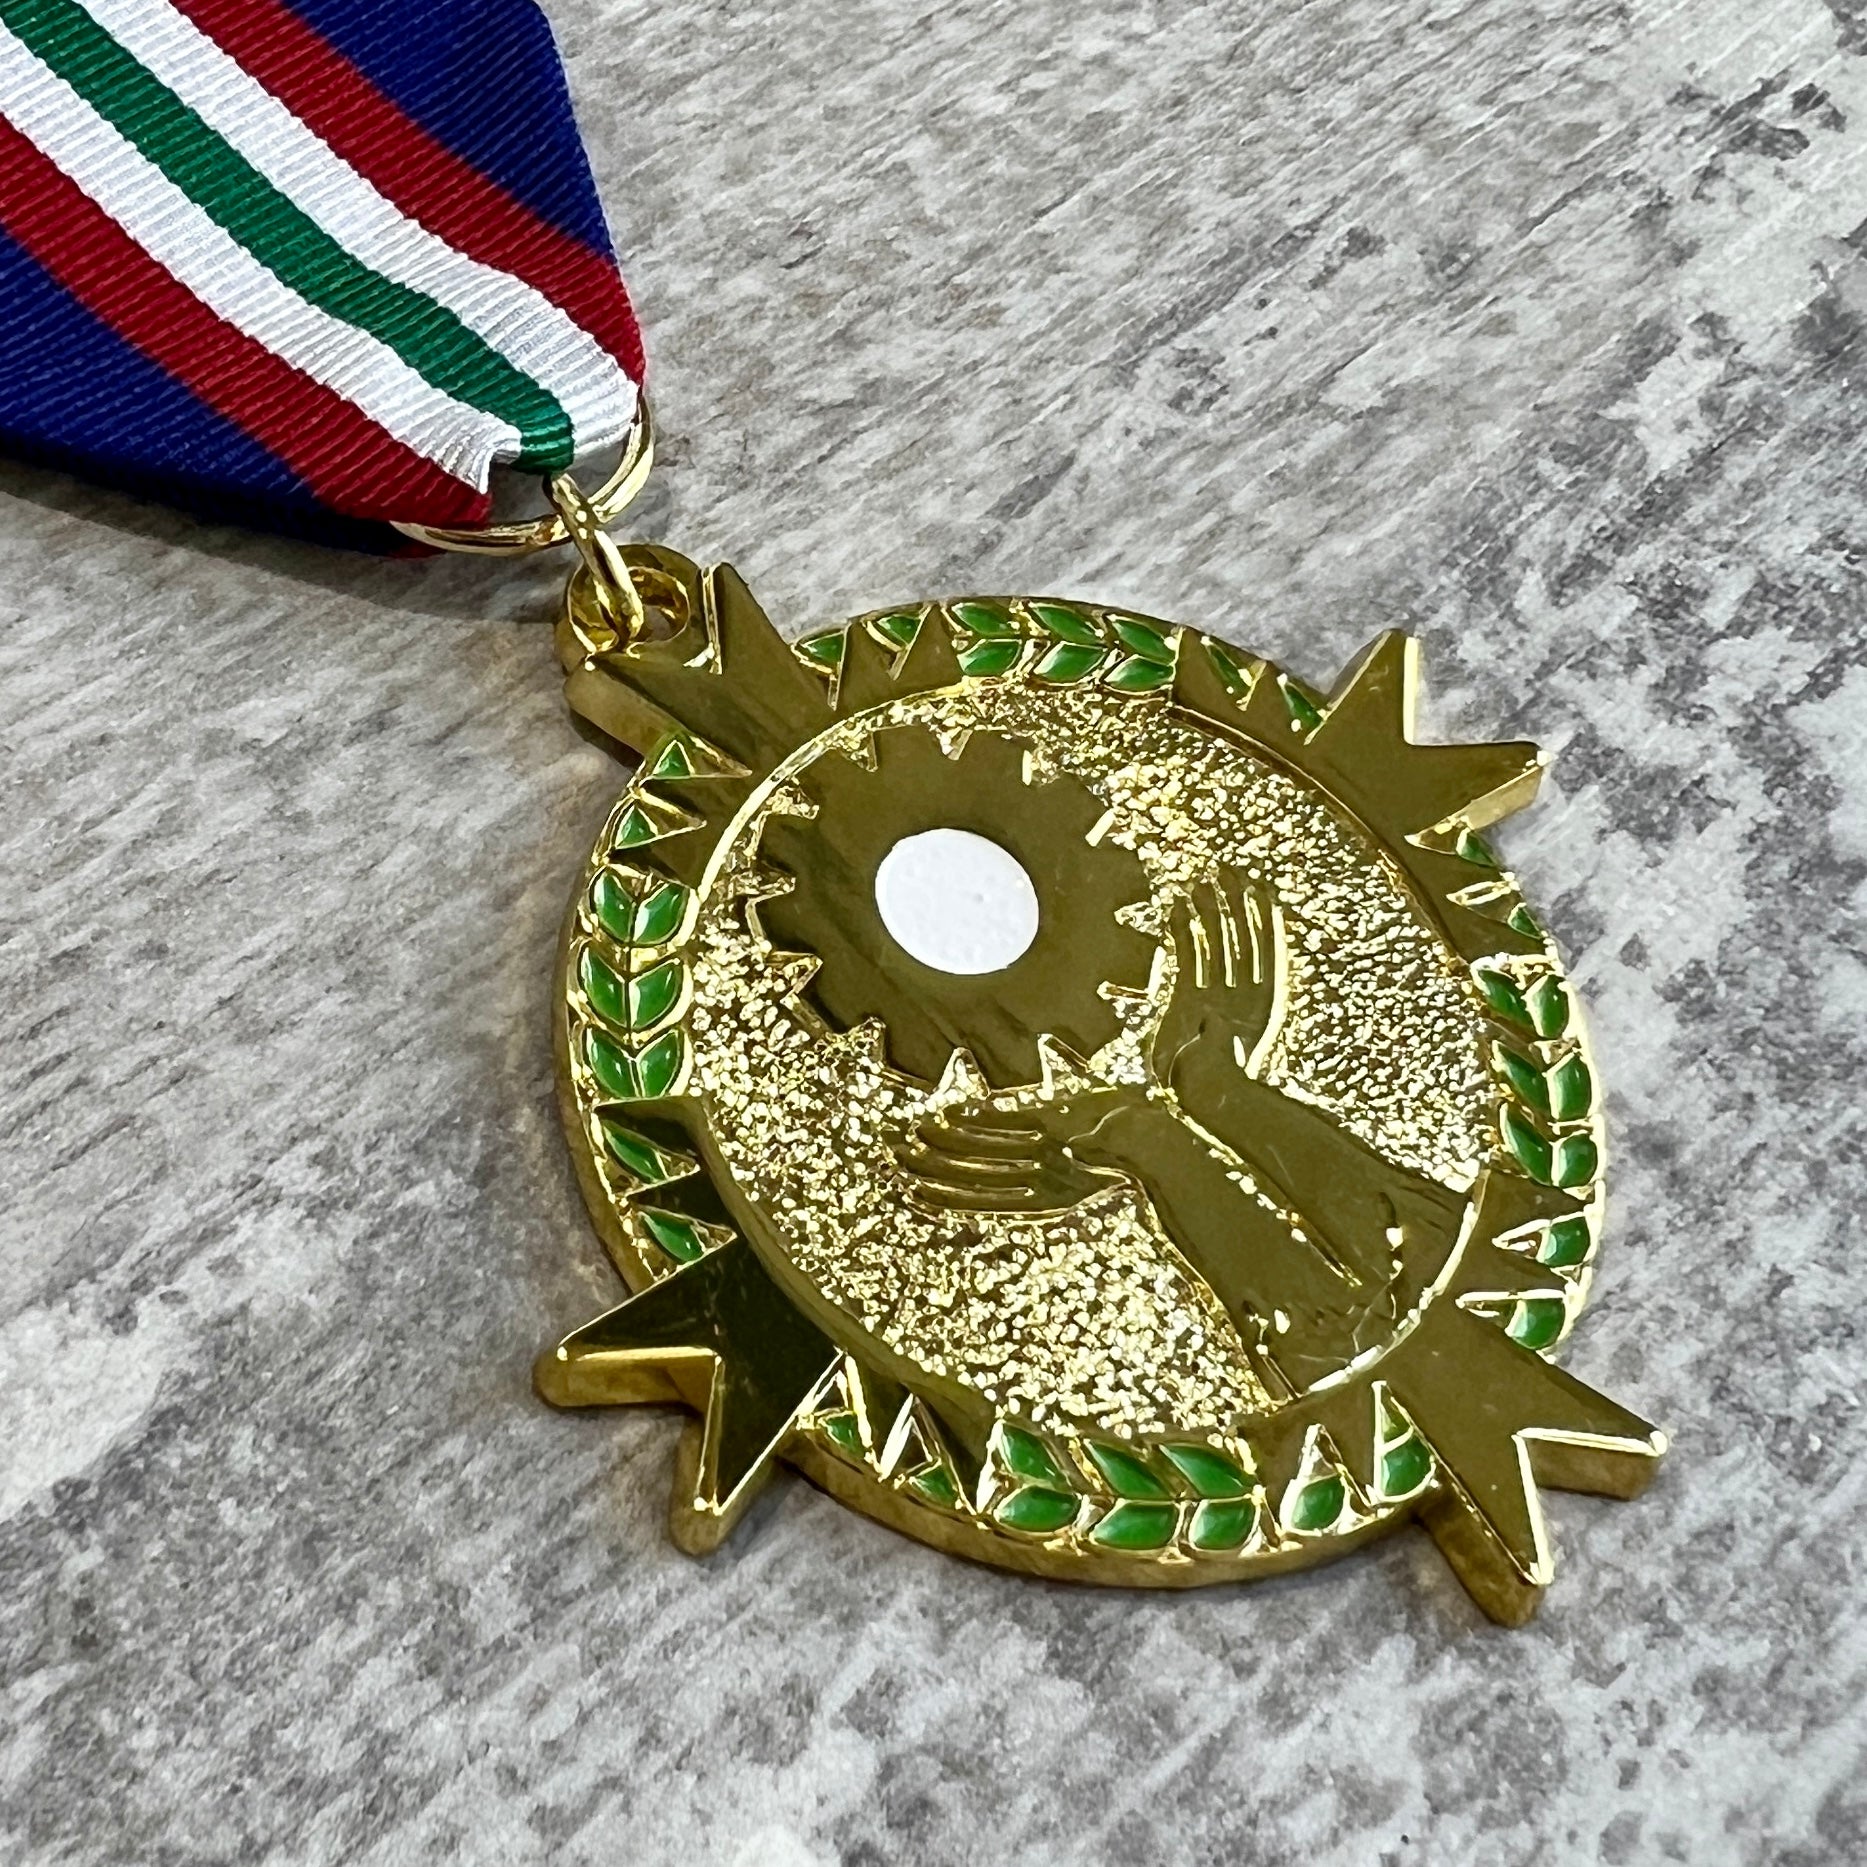 Philippines Military Civic Action Medal - Foxhole Medals